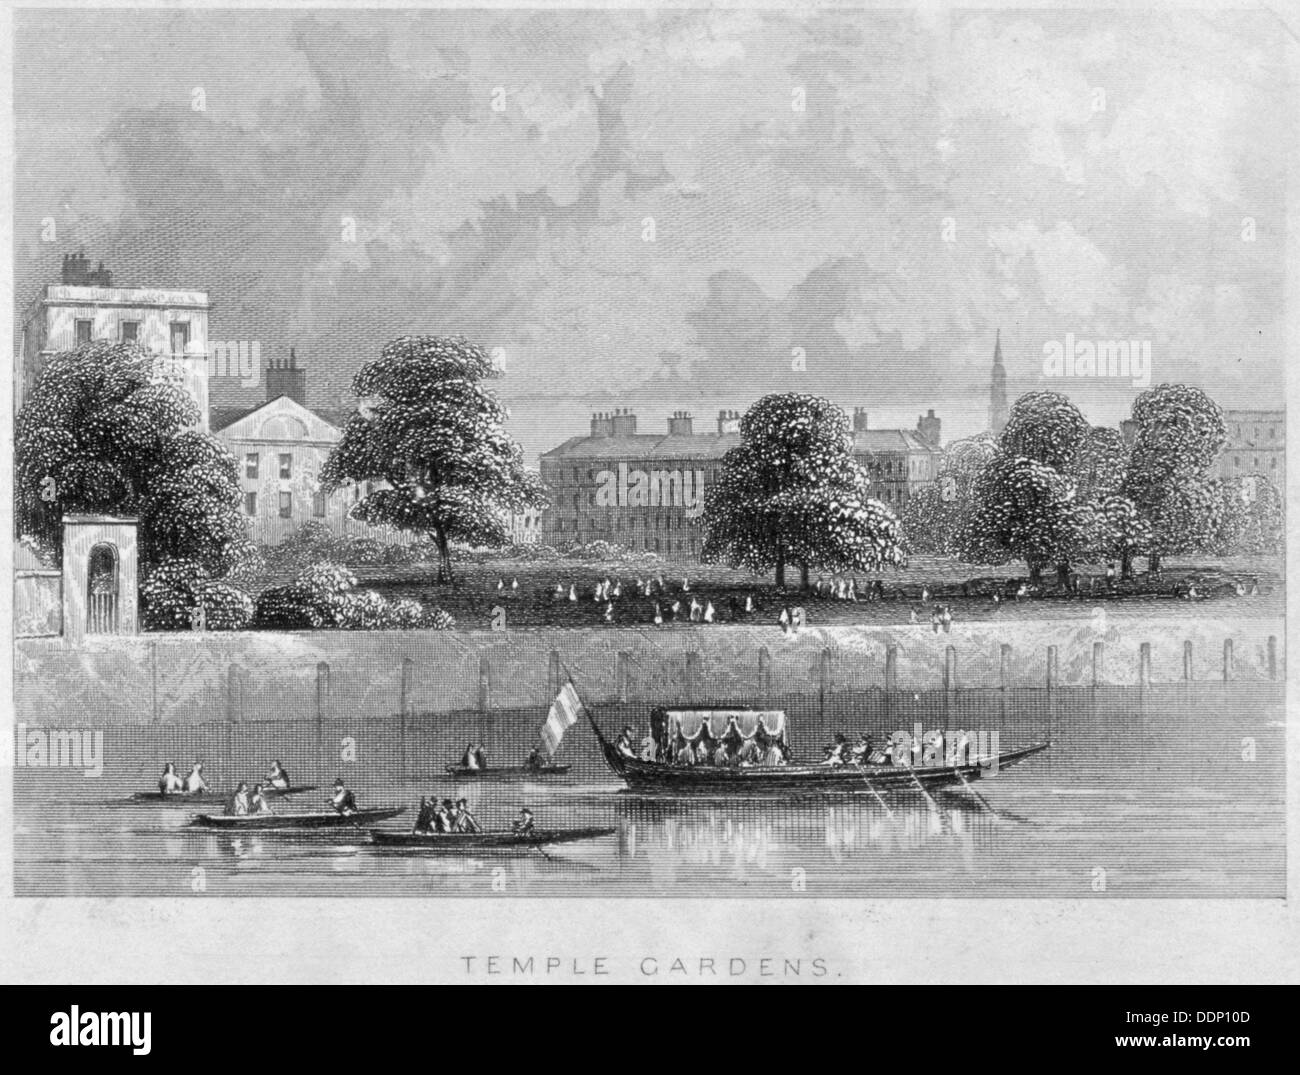 View of Temple Gardens from the Thames with boats on the river, City of London, c1850.               Artist: Anon Stock Photo